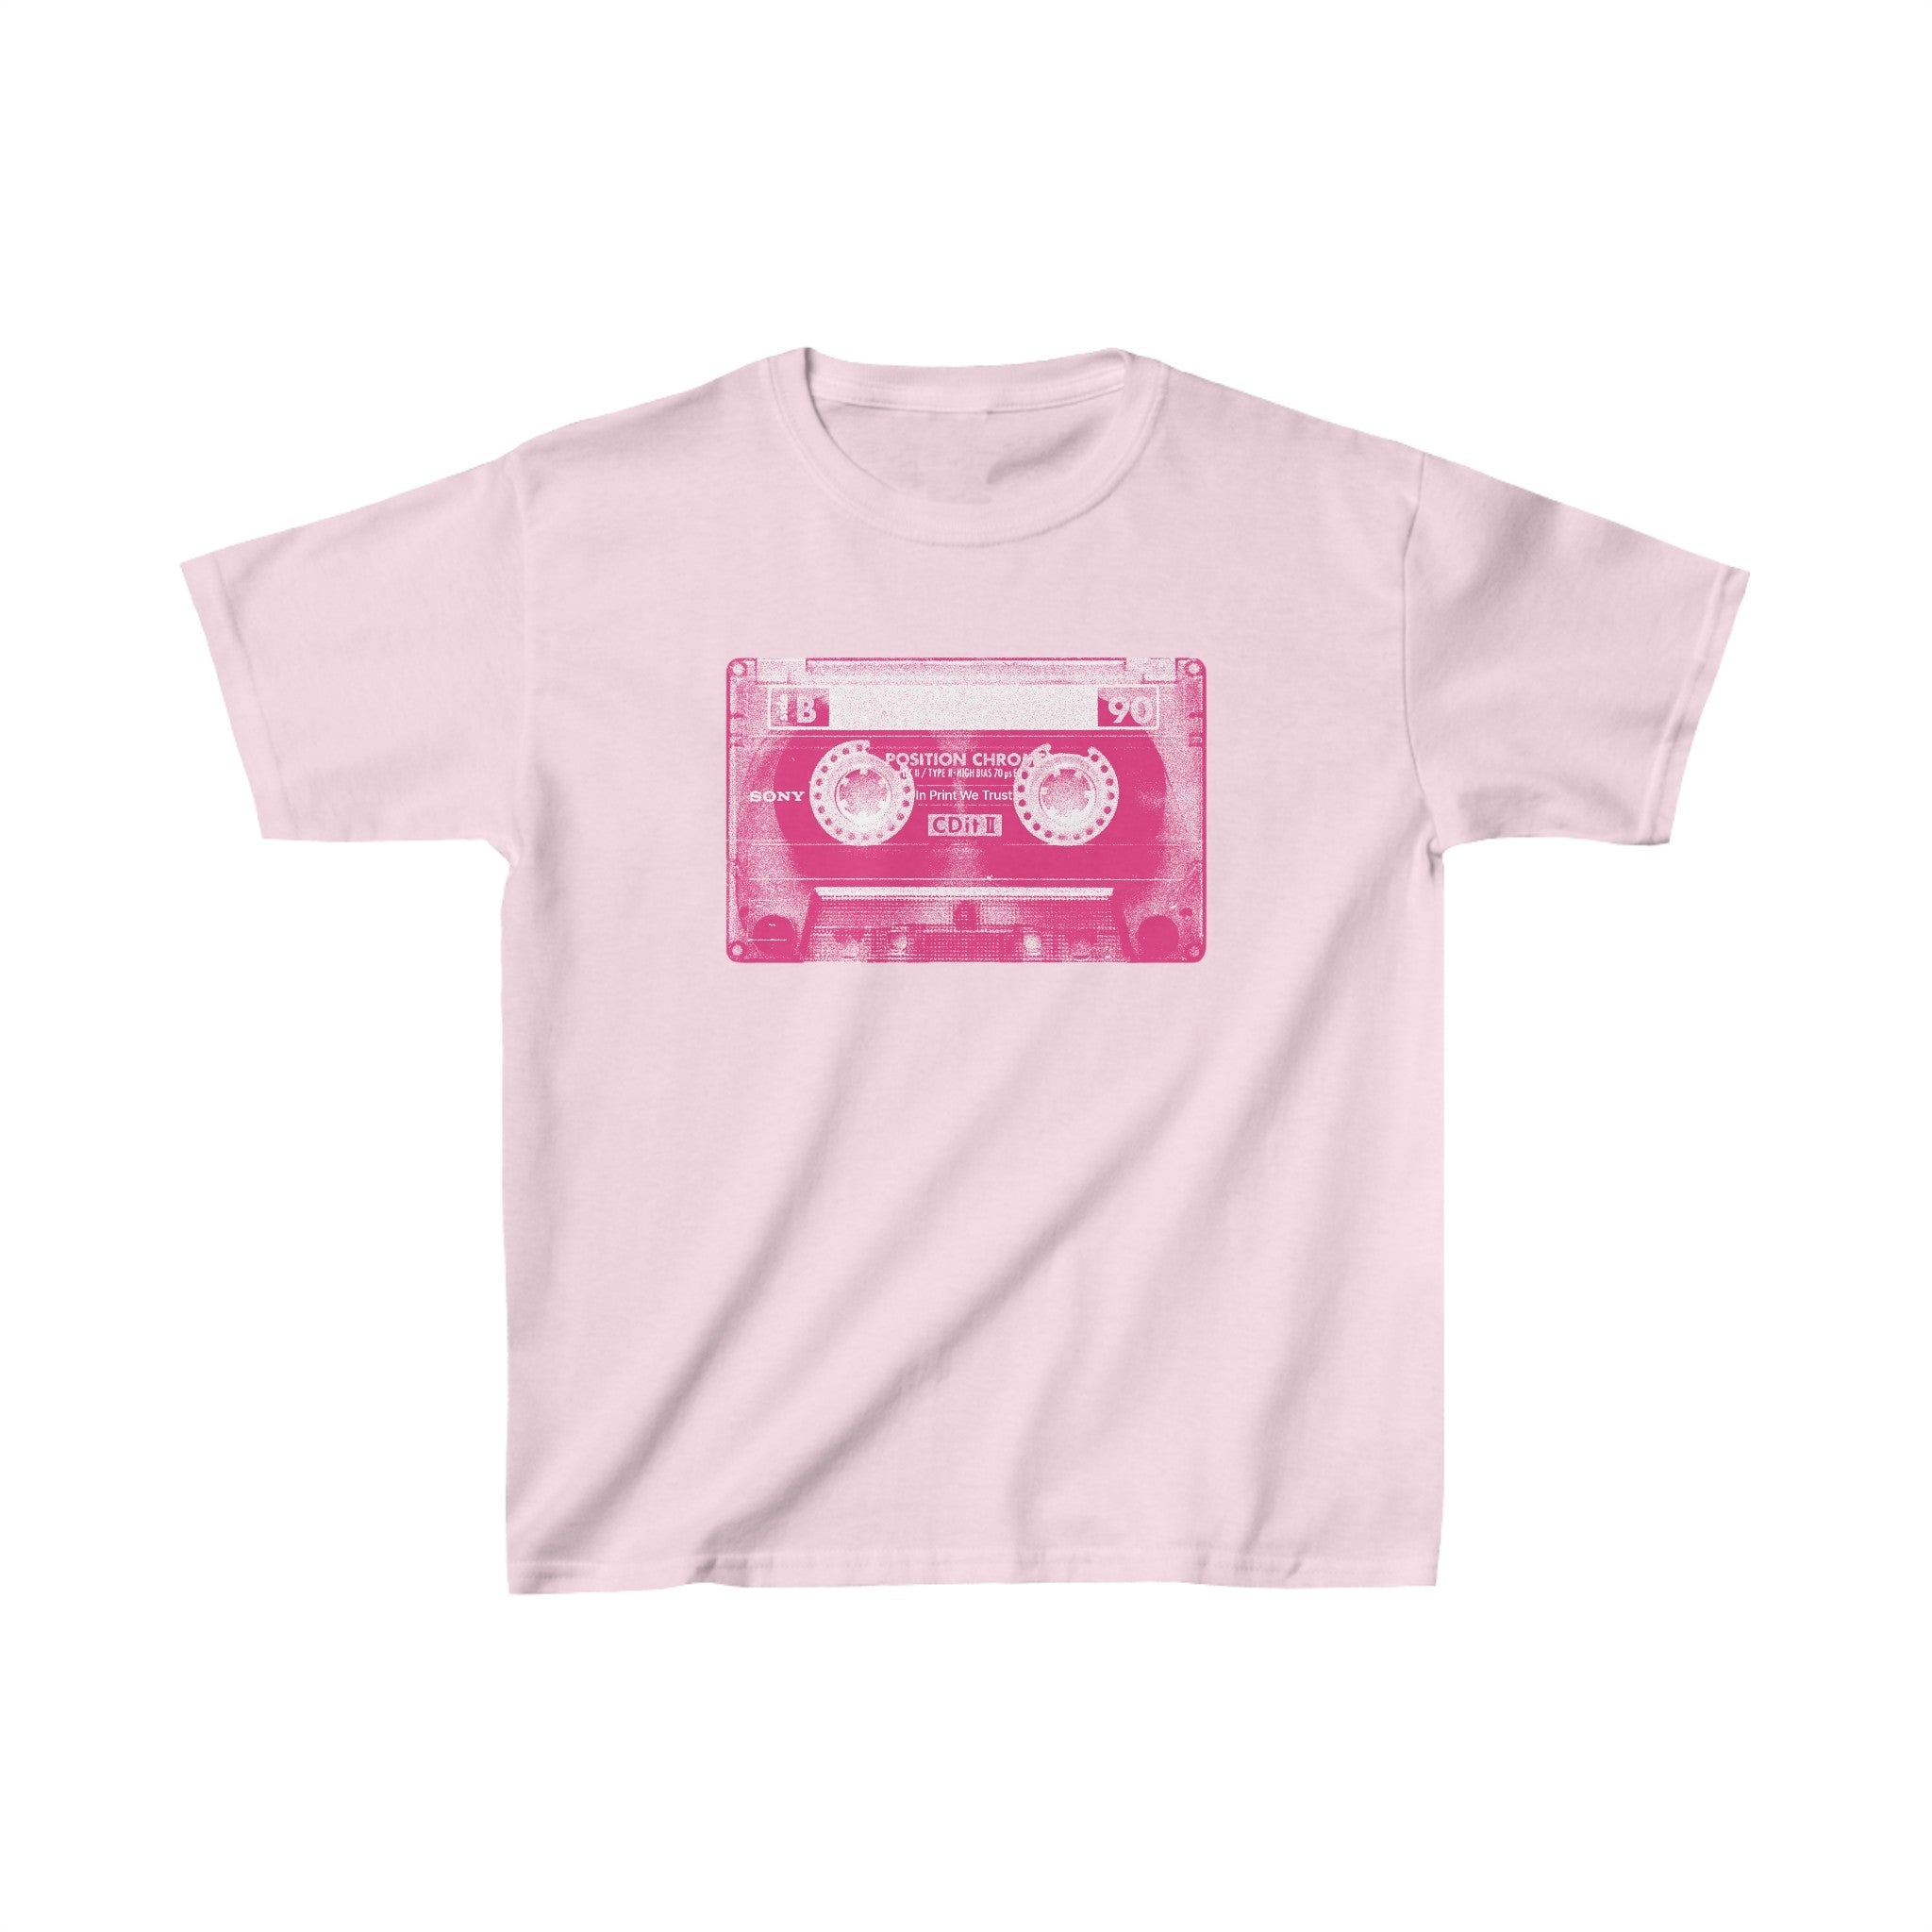 'Face the Music' baby tee - In Print We Trust